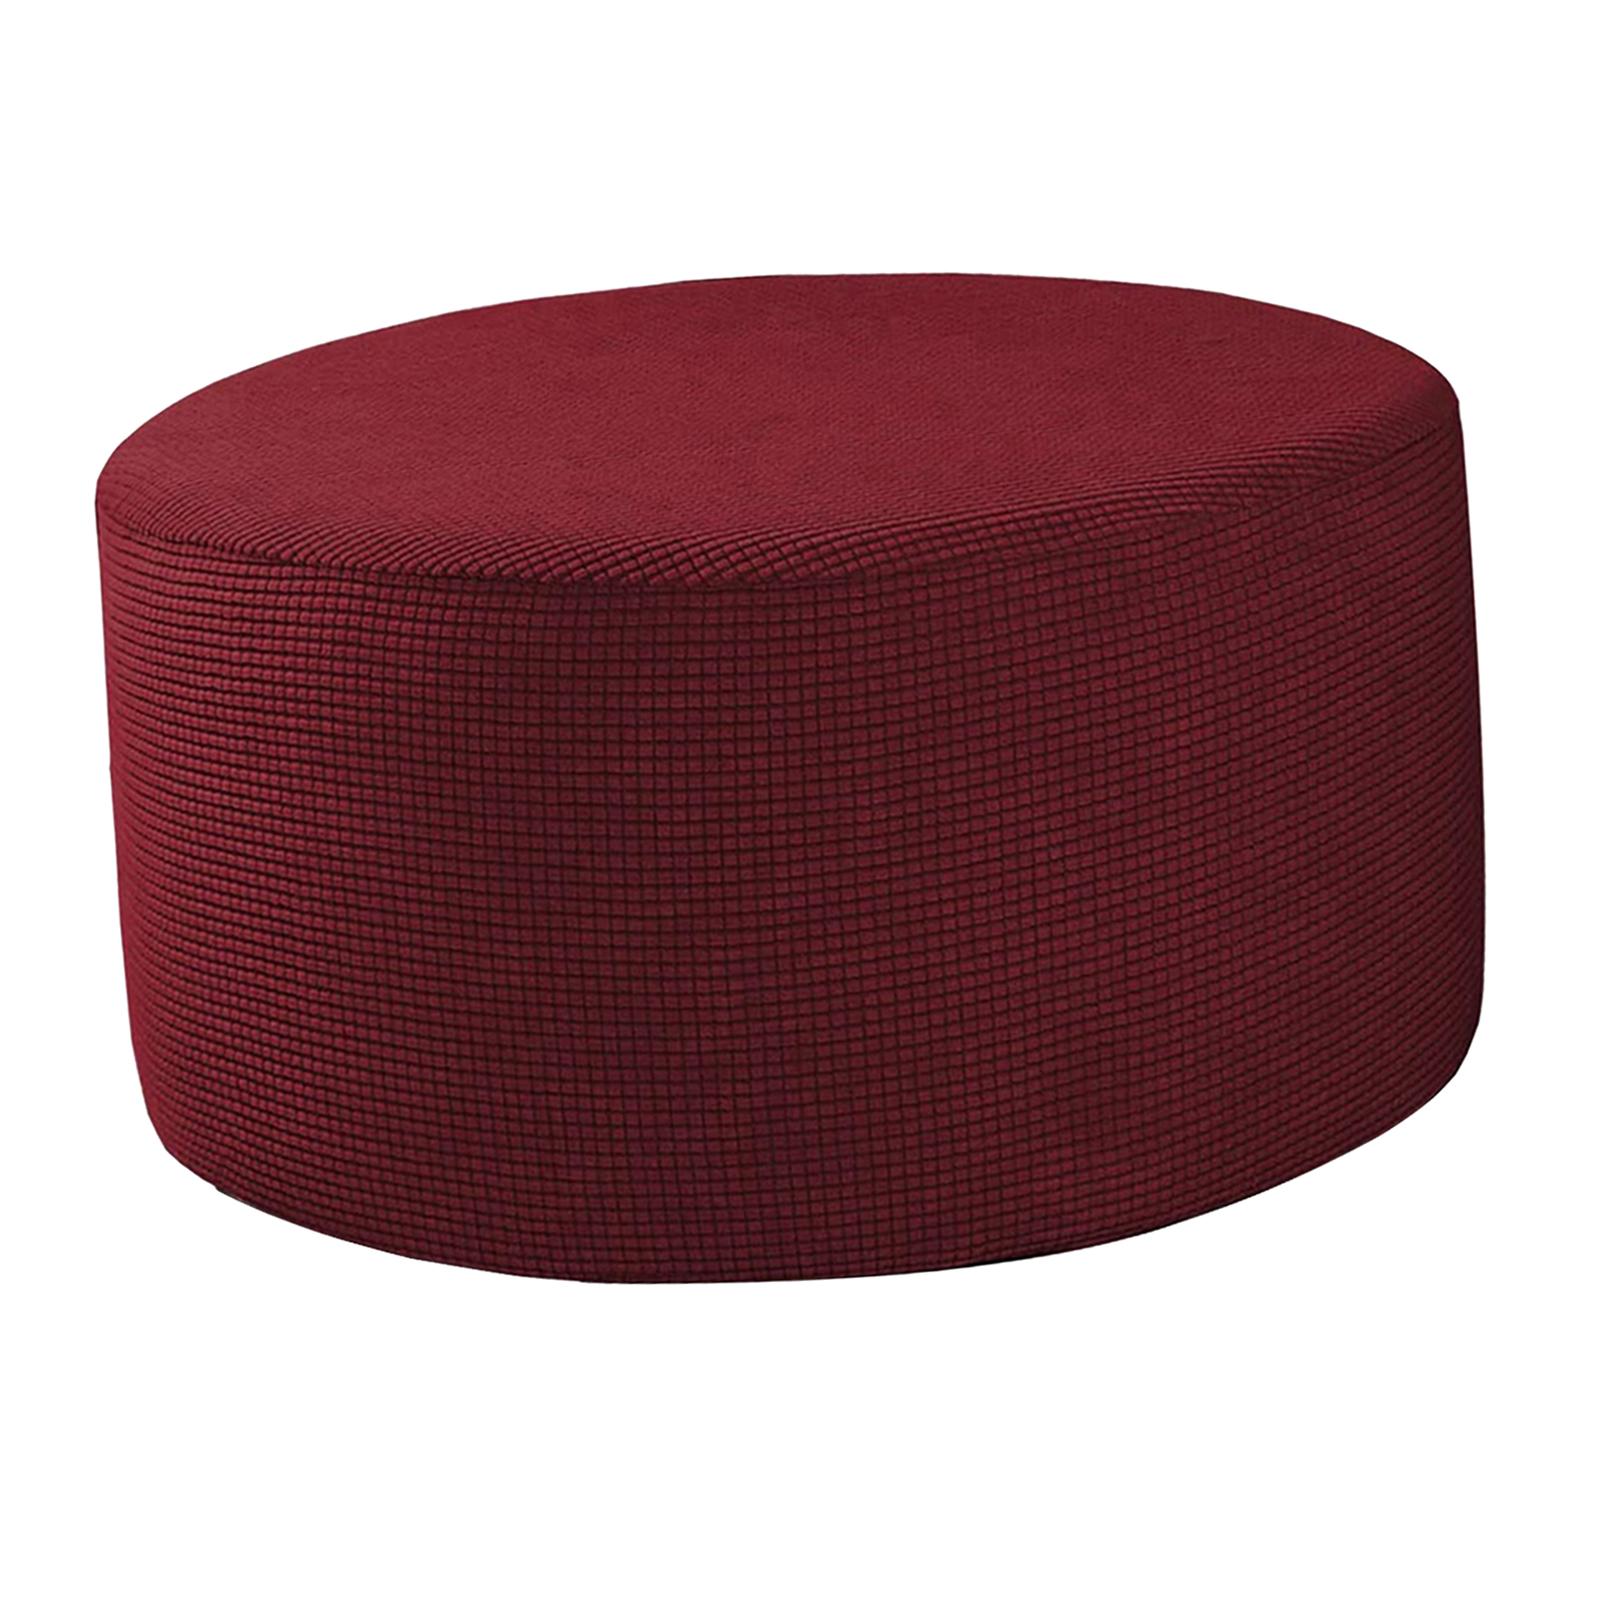 Ottoman Slipcovers Round Ottoman Footstool Cover Removable Red - image 3 of 6